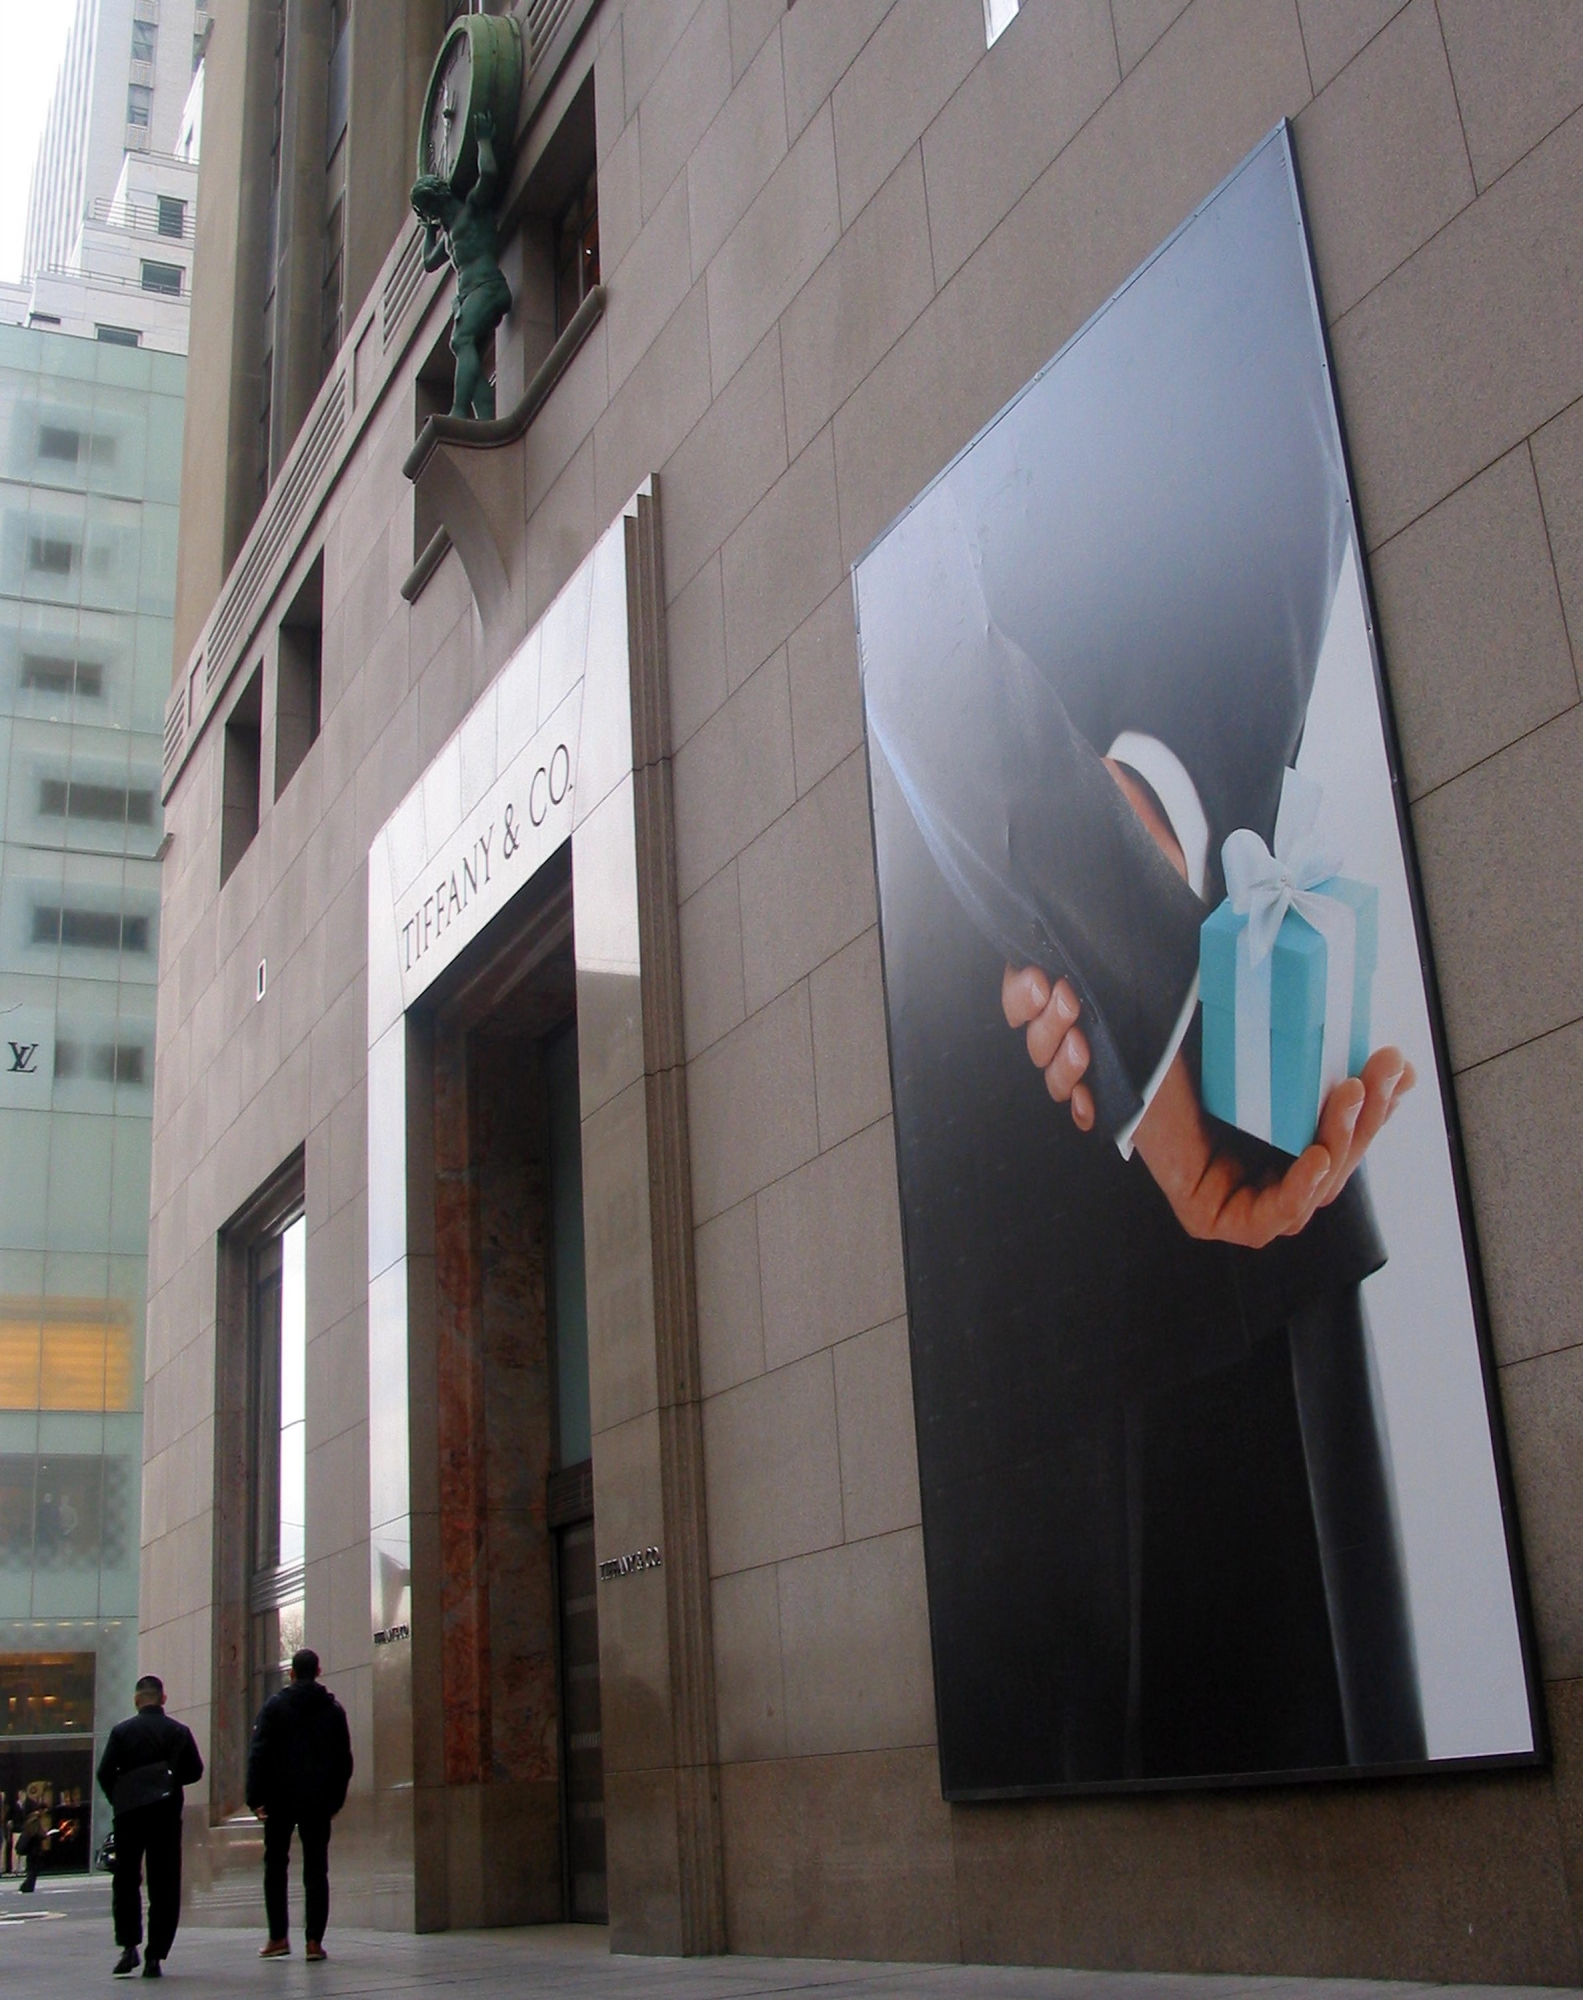 Two men pass in front of the Tiffany store in New York on Tuesday morning March 28, 2006. Tiffany & Co., a seller of jewelry and luxury items, on Tuesday said its profit fell 35 percent in the fourth quarter from results a year earlier that included a one-time gain. (KEYSTONE/AP Photo/Shahrzad Elghanayan) USA EARNS TIFFANY